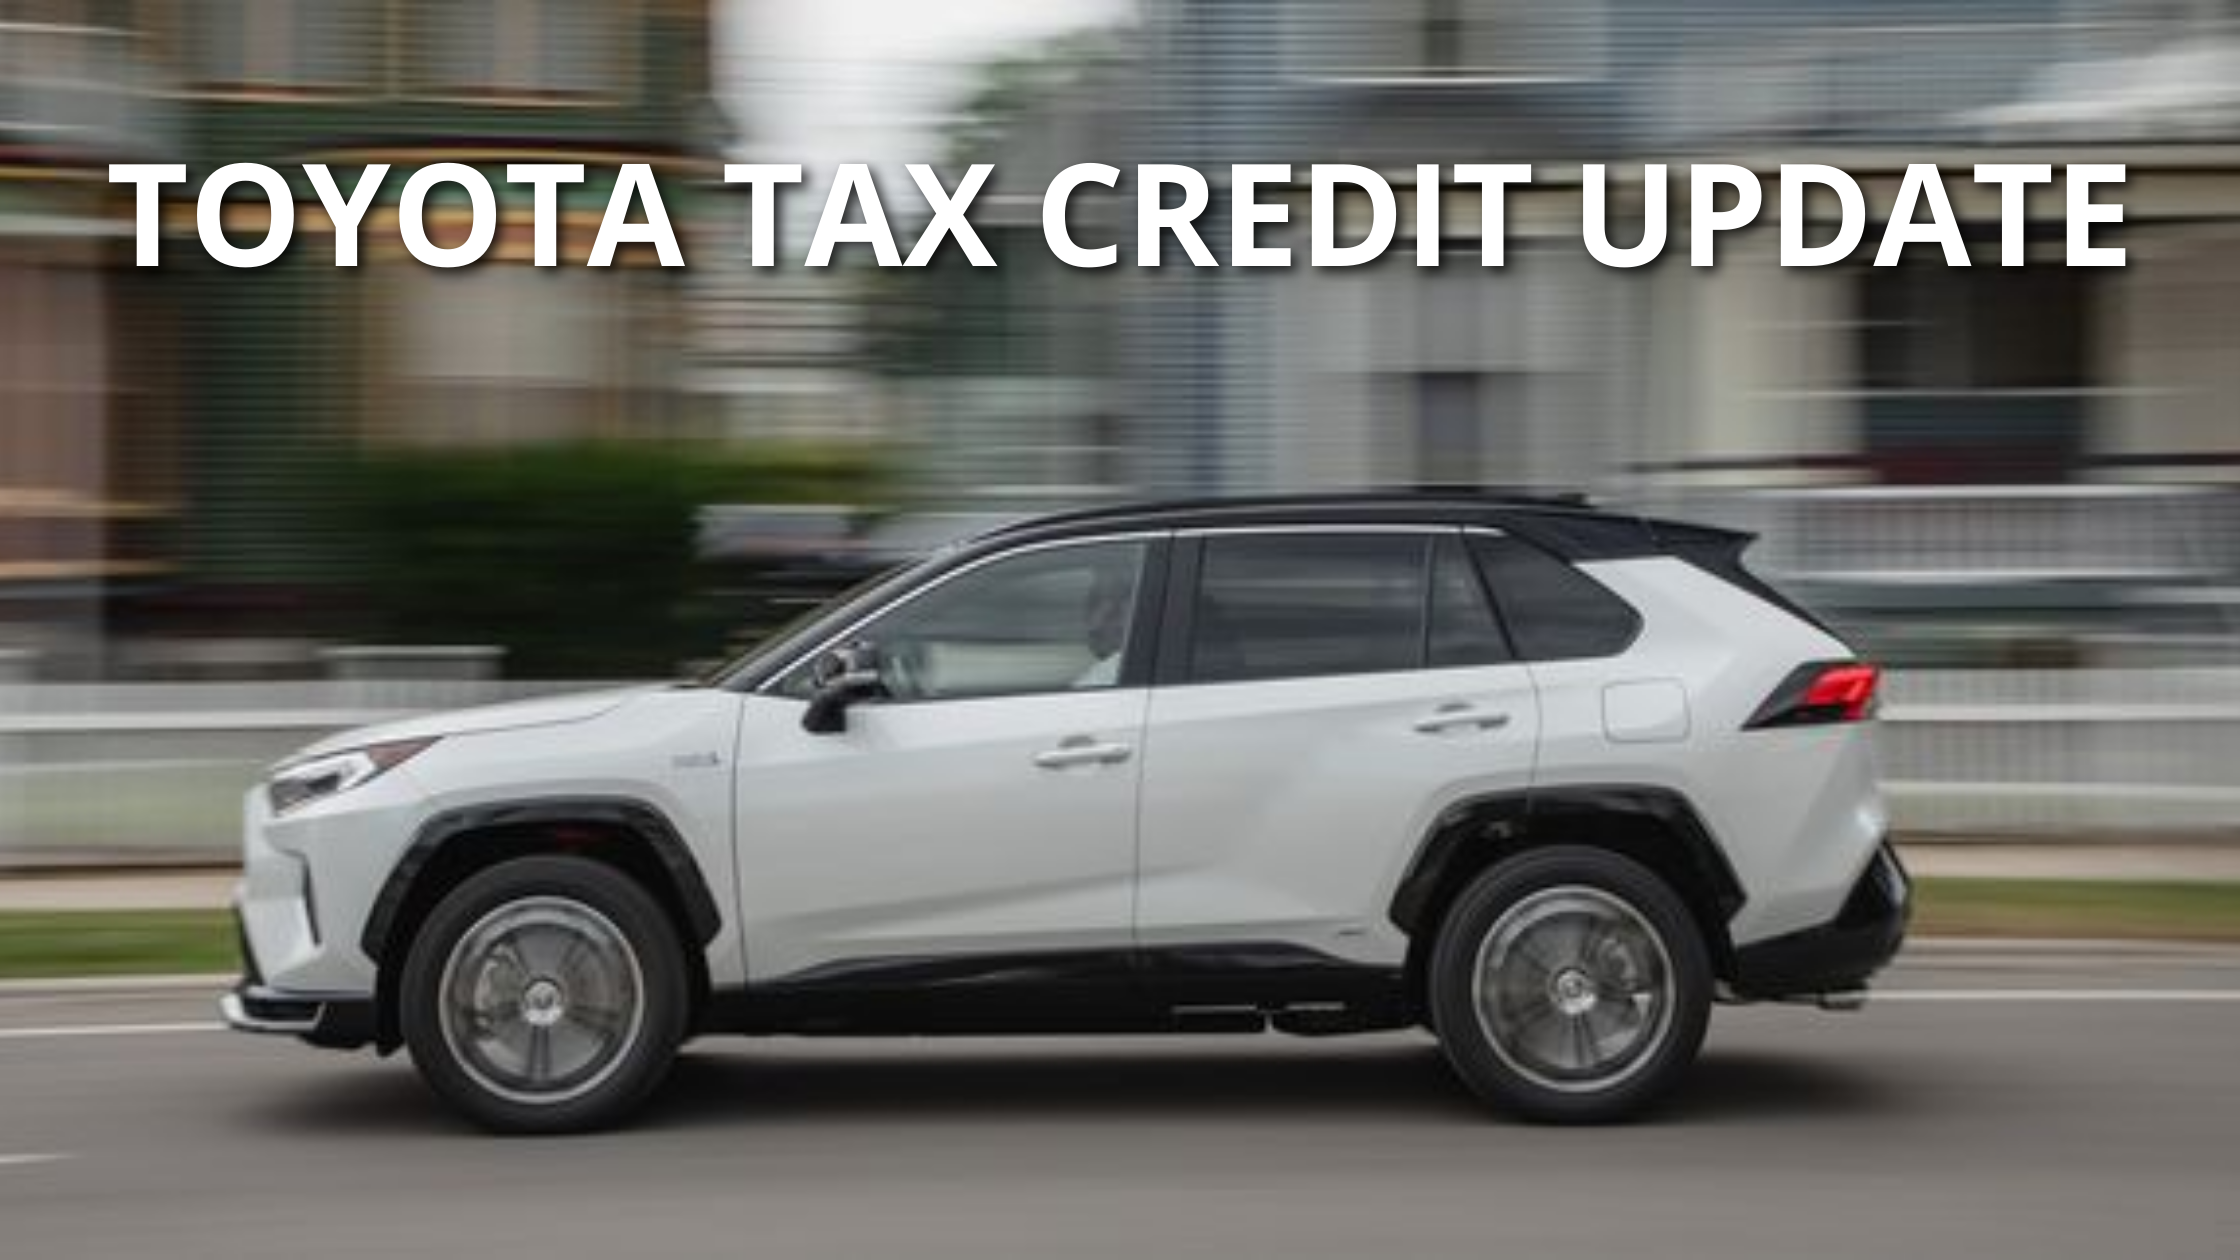 heads-up-the-federal-ev-tax-credit-for-toyota-is-about-to-phase-out